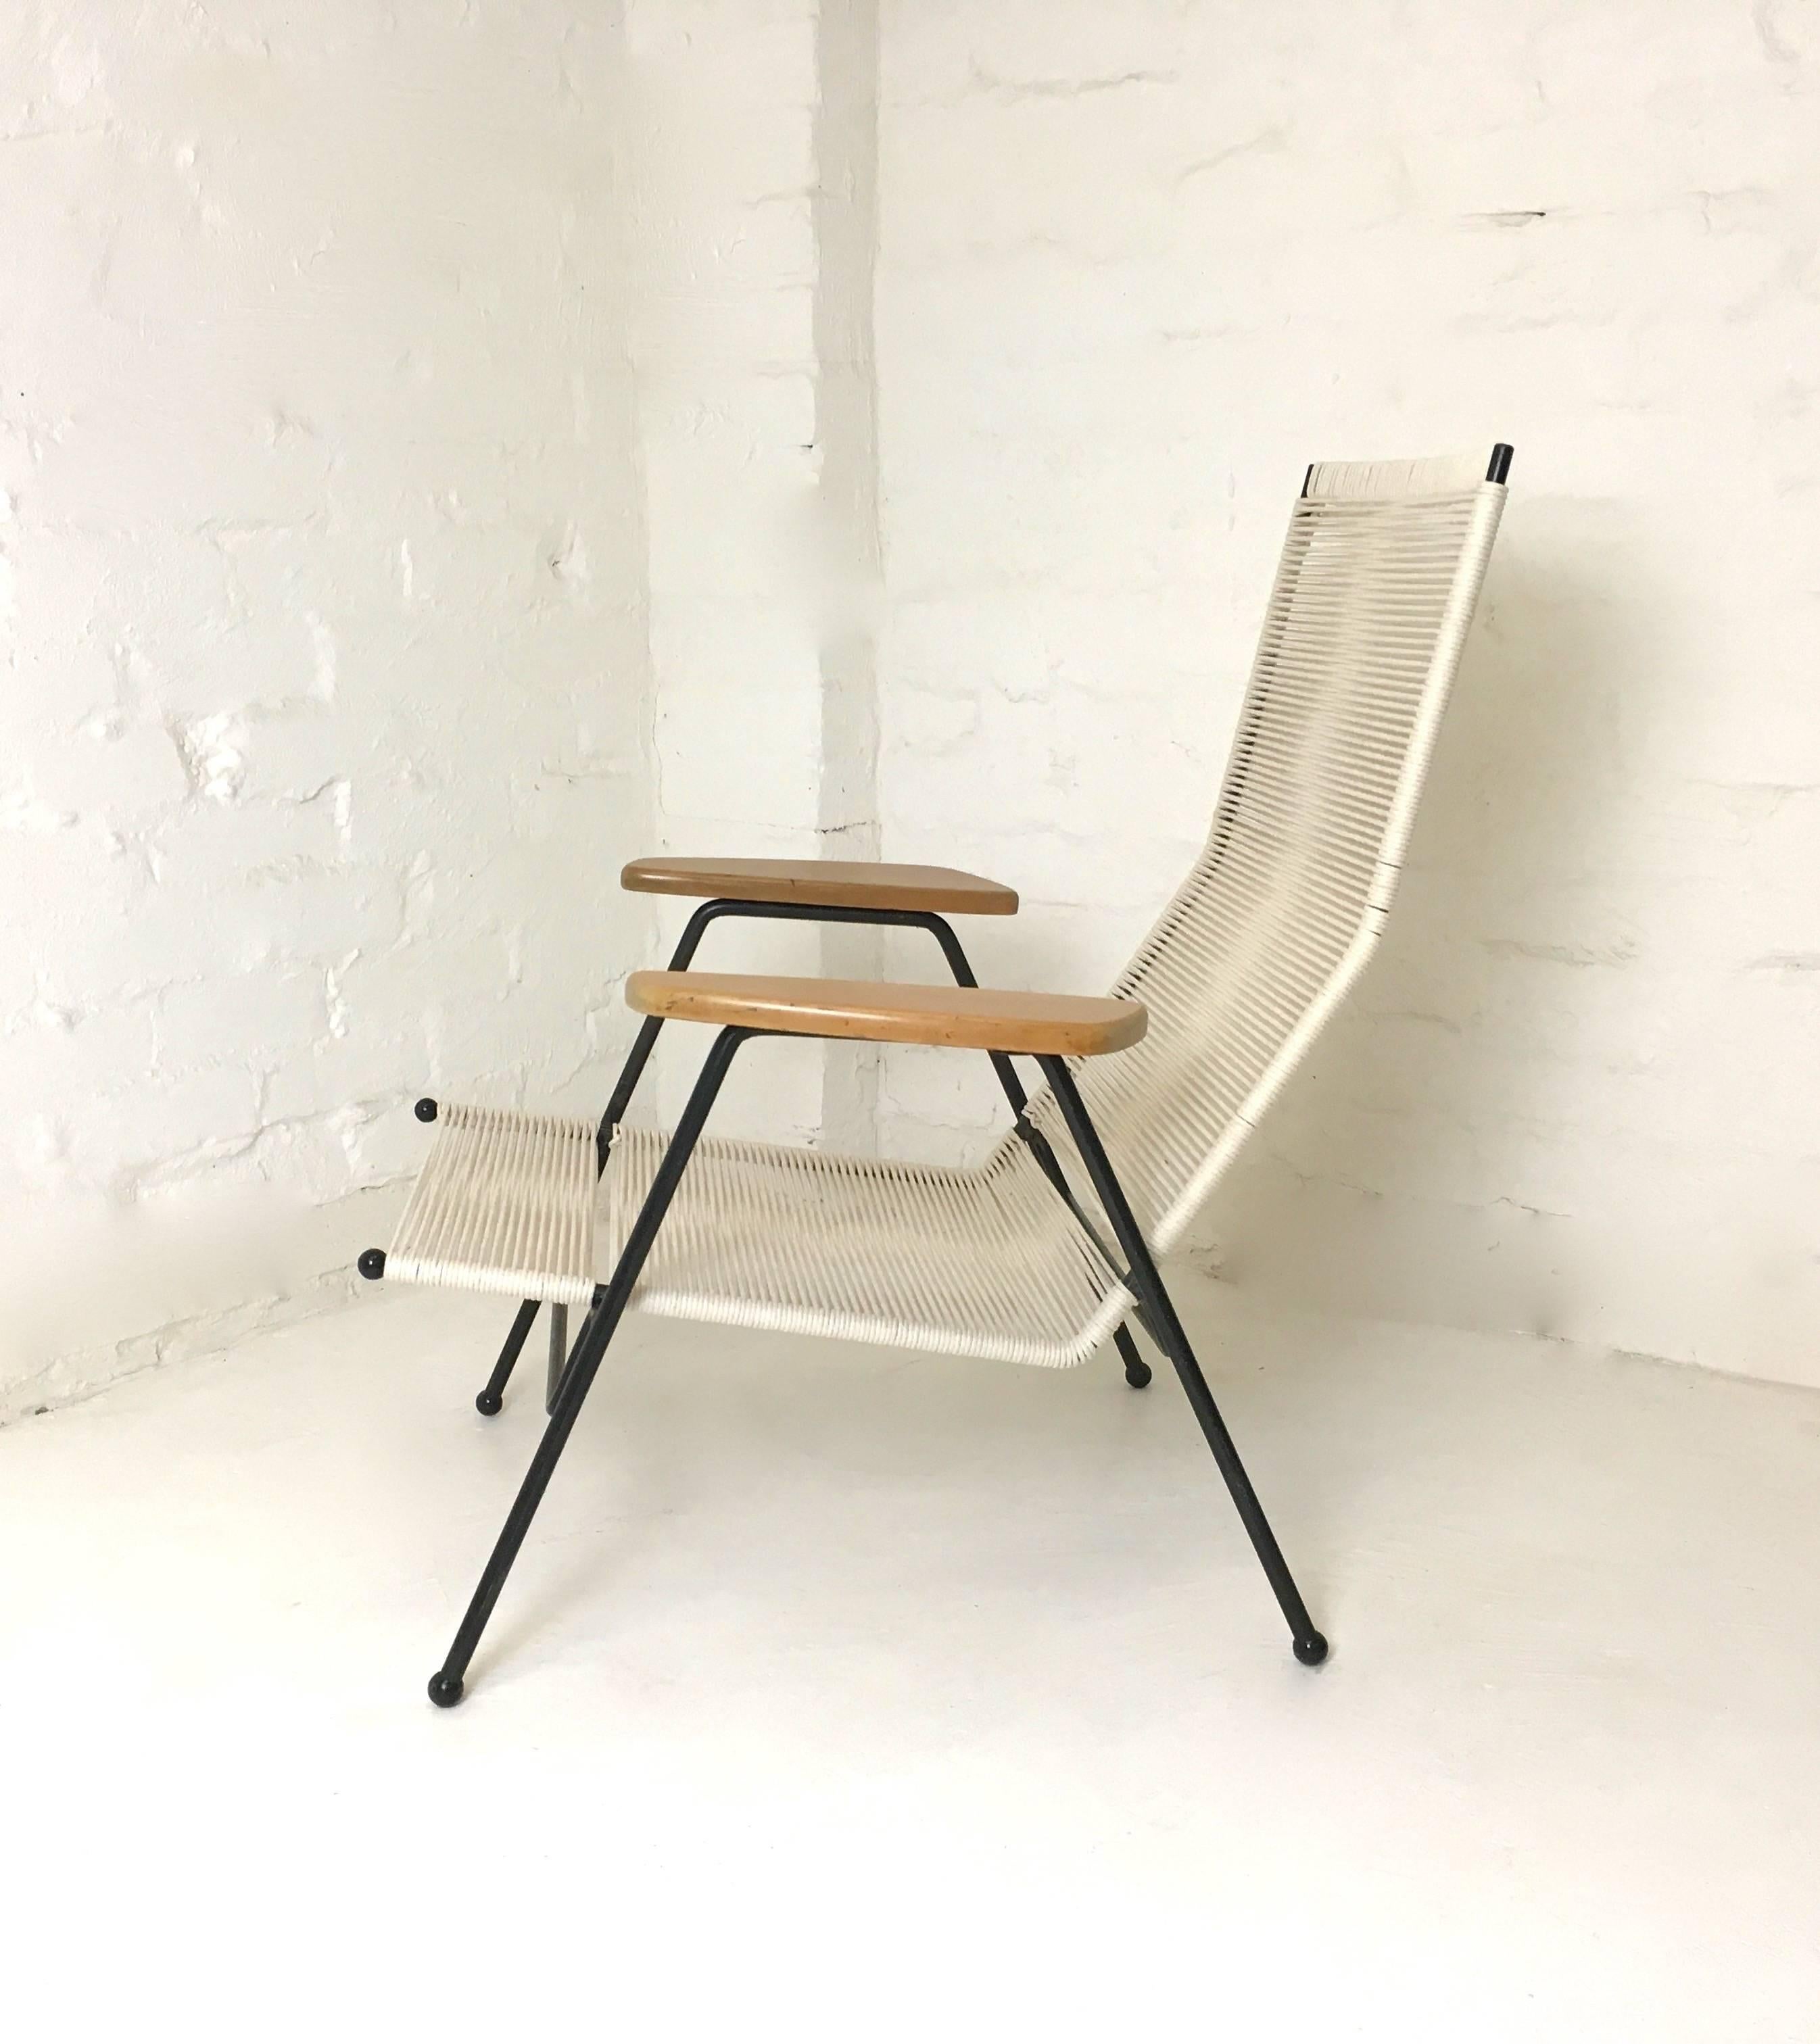 This beautifully built steel rod chair is a rare design by Bernard Goss for Pandar Furniture. Advertised as the 'Calypso' chair, it suggests warm breezes and relaxation both in shape and in name. 

It was originally available in an upholstered